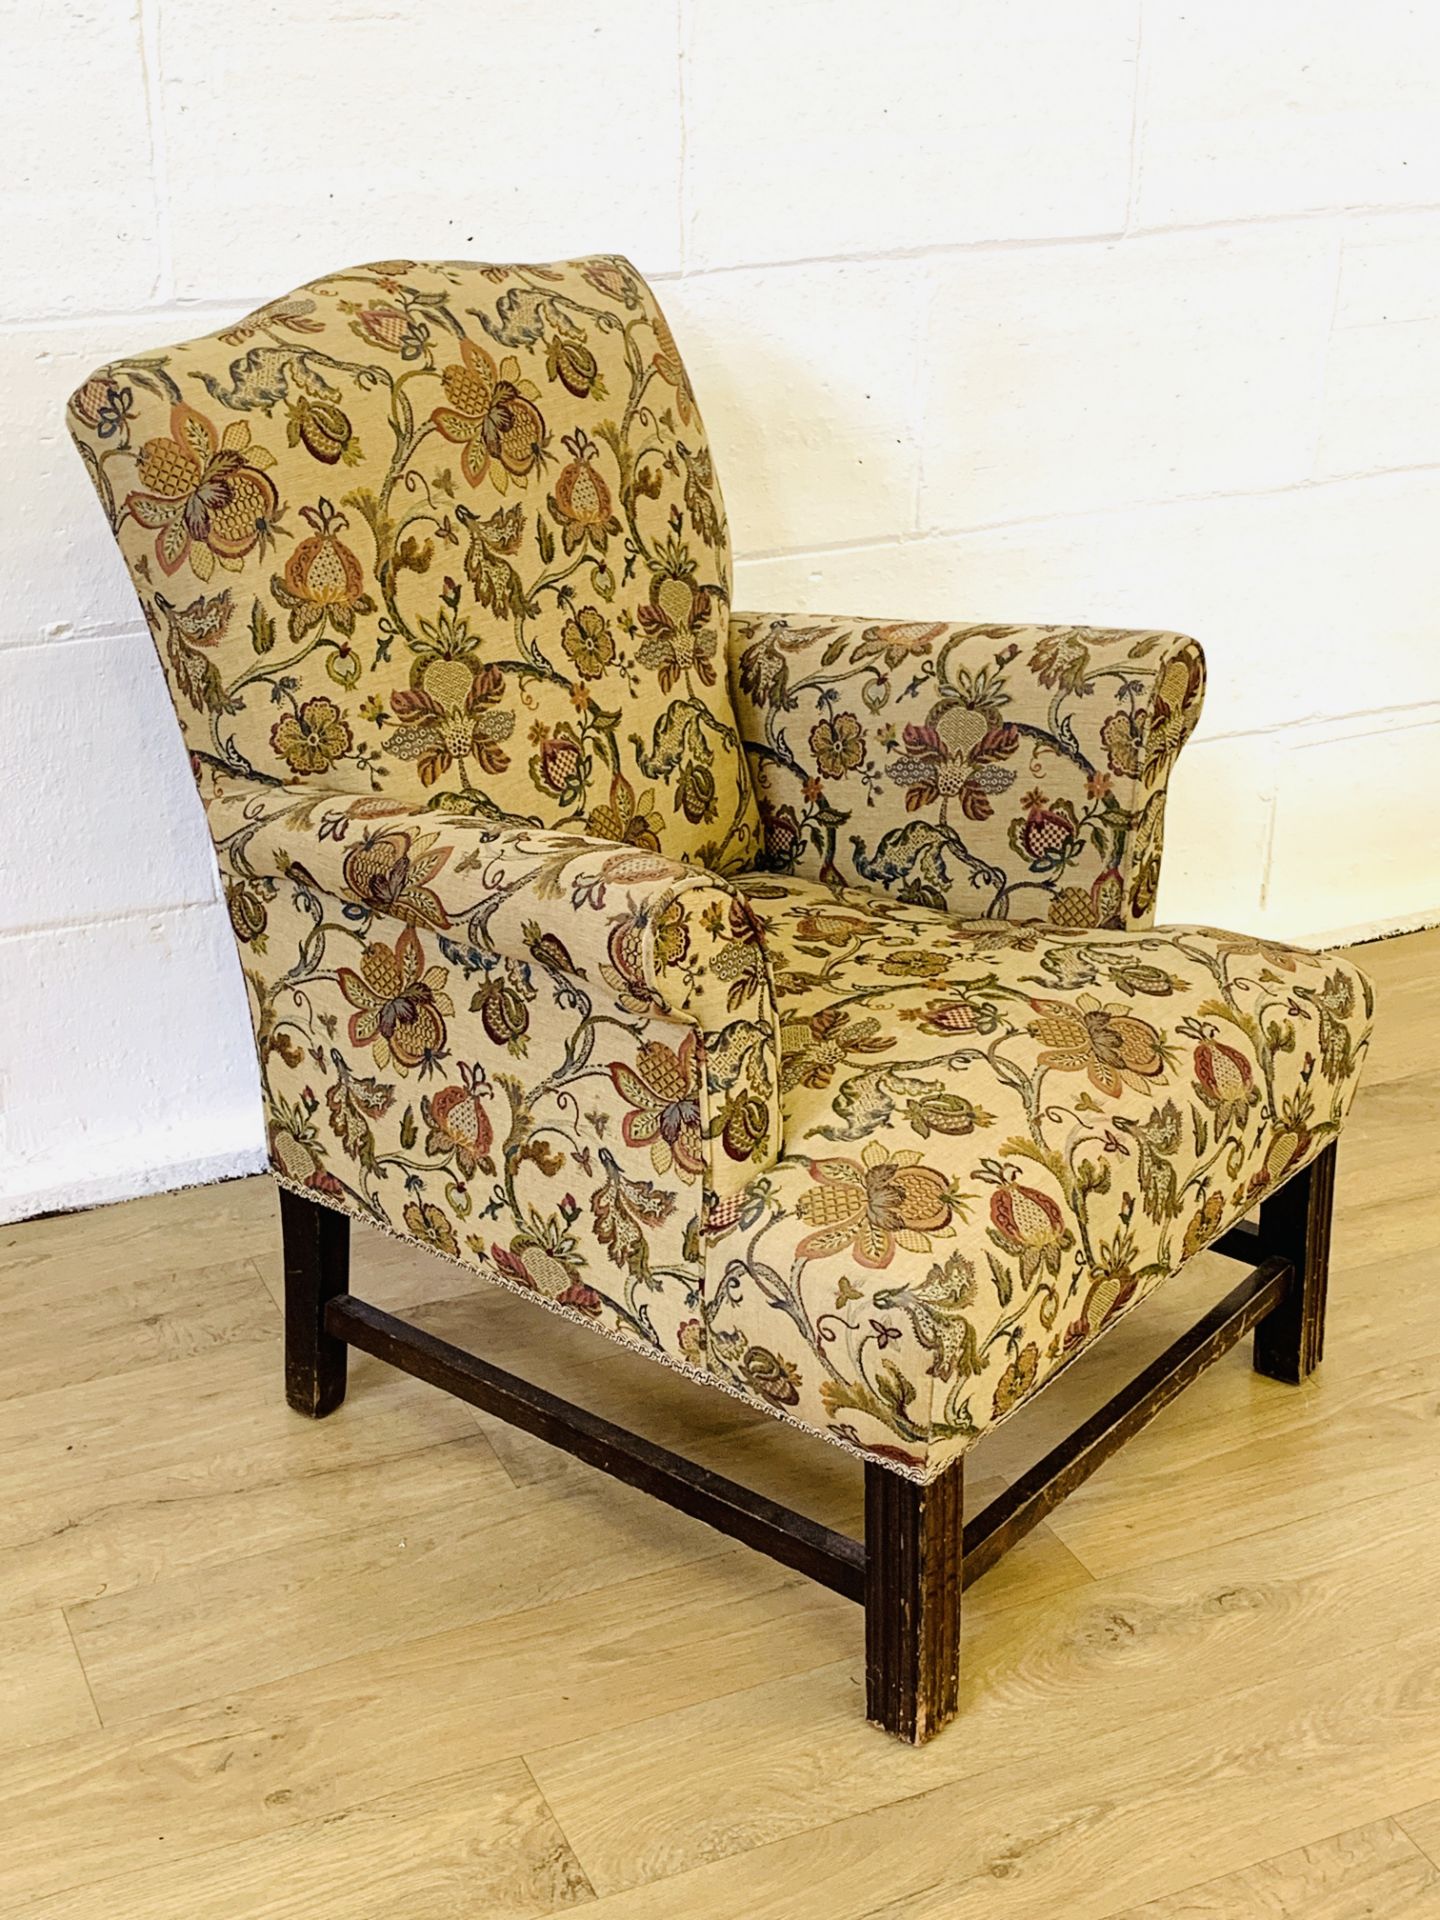 Upholstered armchair - Image 2 of 4